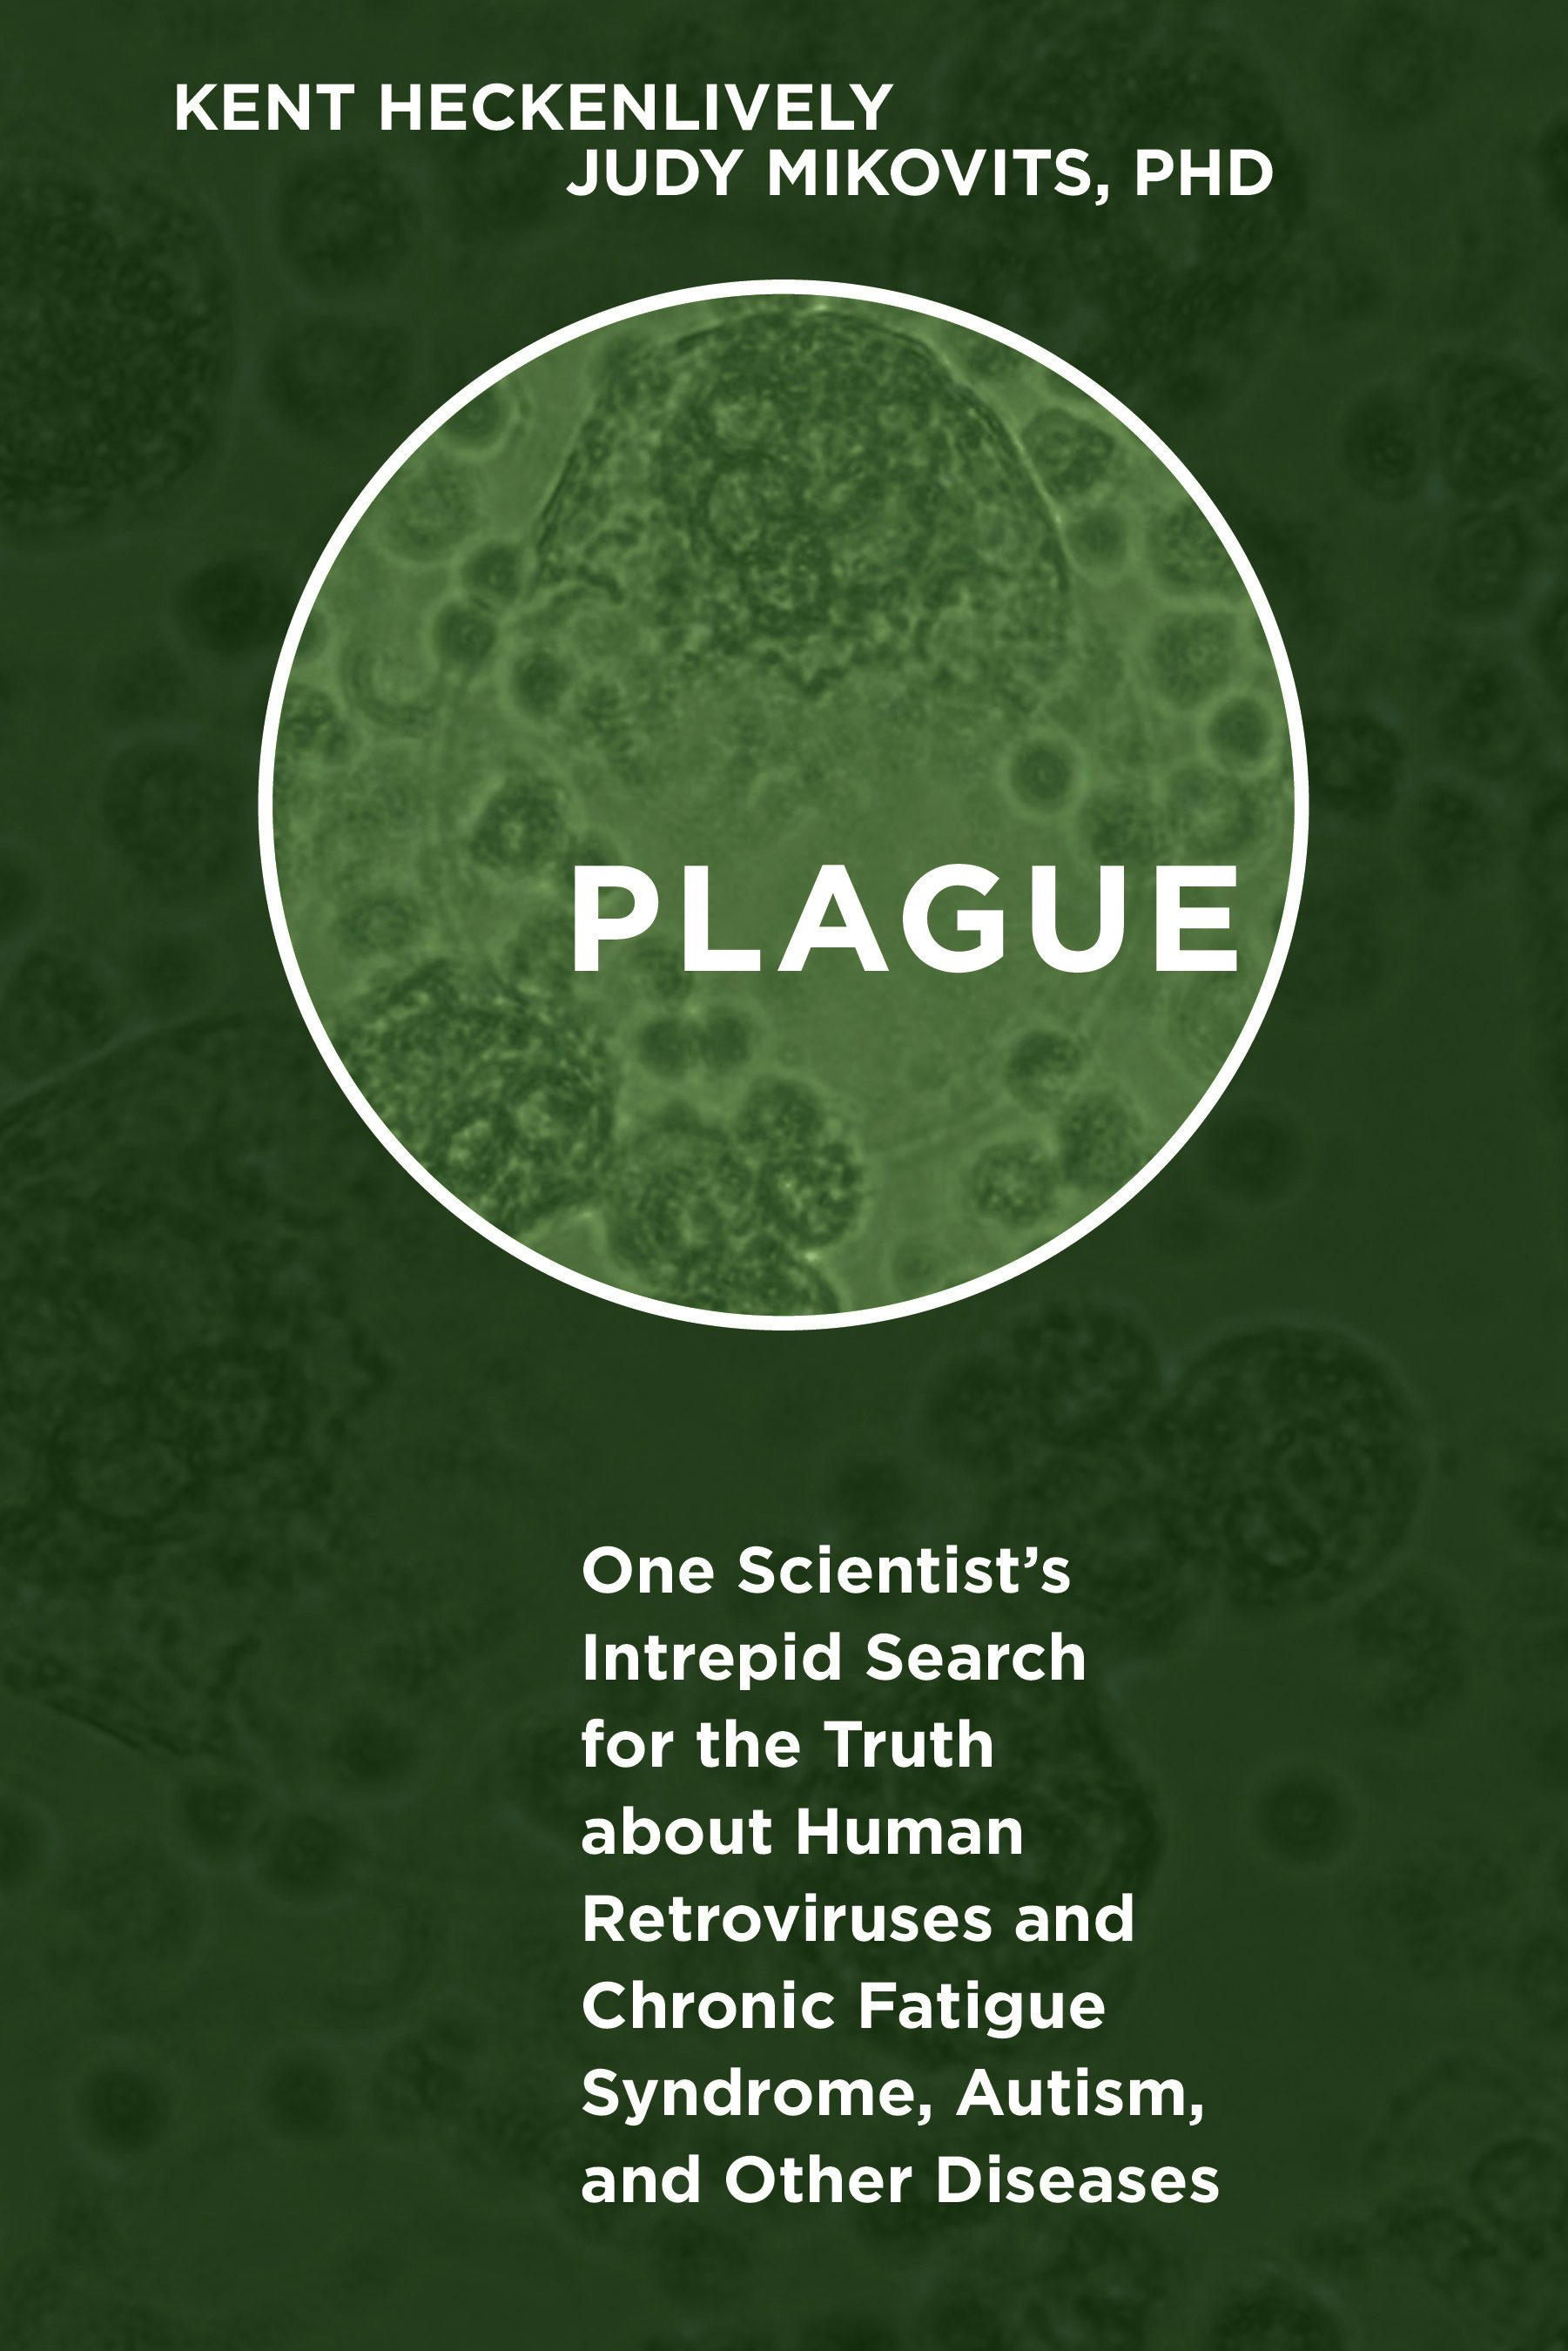 plague by kent heckenlively